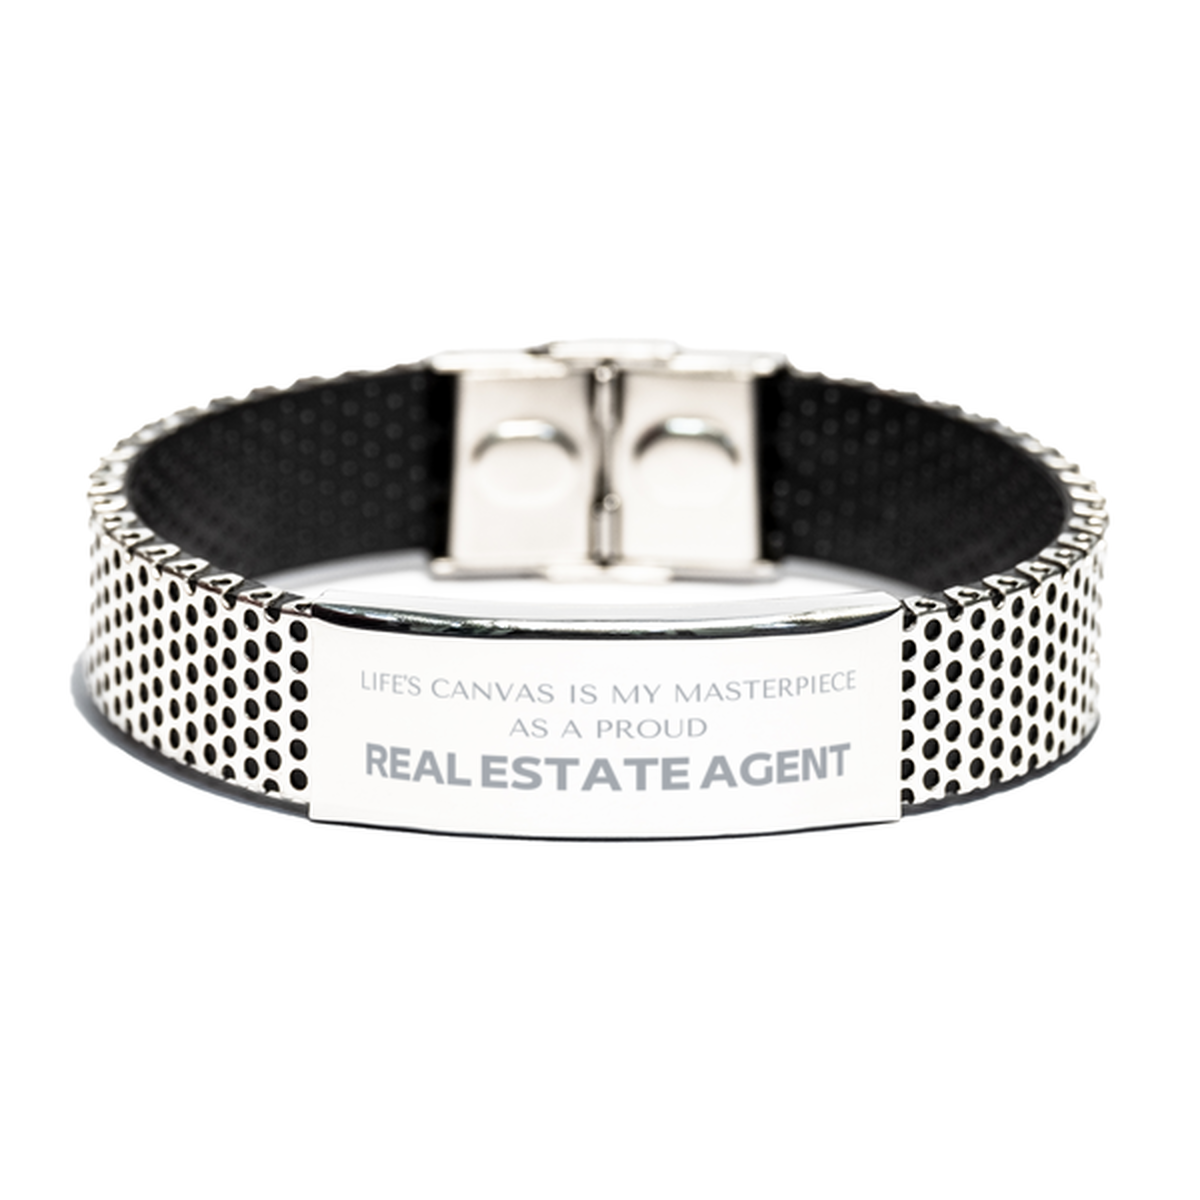 Proud Real Estate Agent Gifts, Life's canvas is my masterpiece, Epic Birthday Christmas Unique Stainless Steel Bracelet For Real Estate Agent, Coworkers, Men, Women, Friends